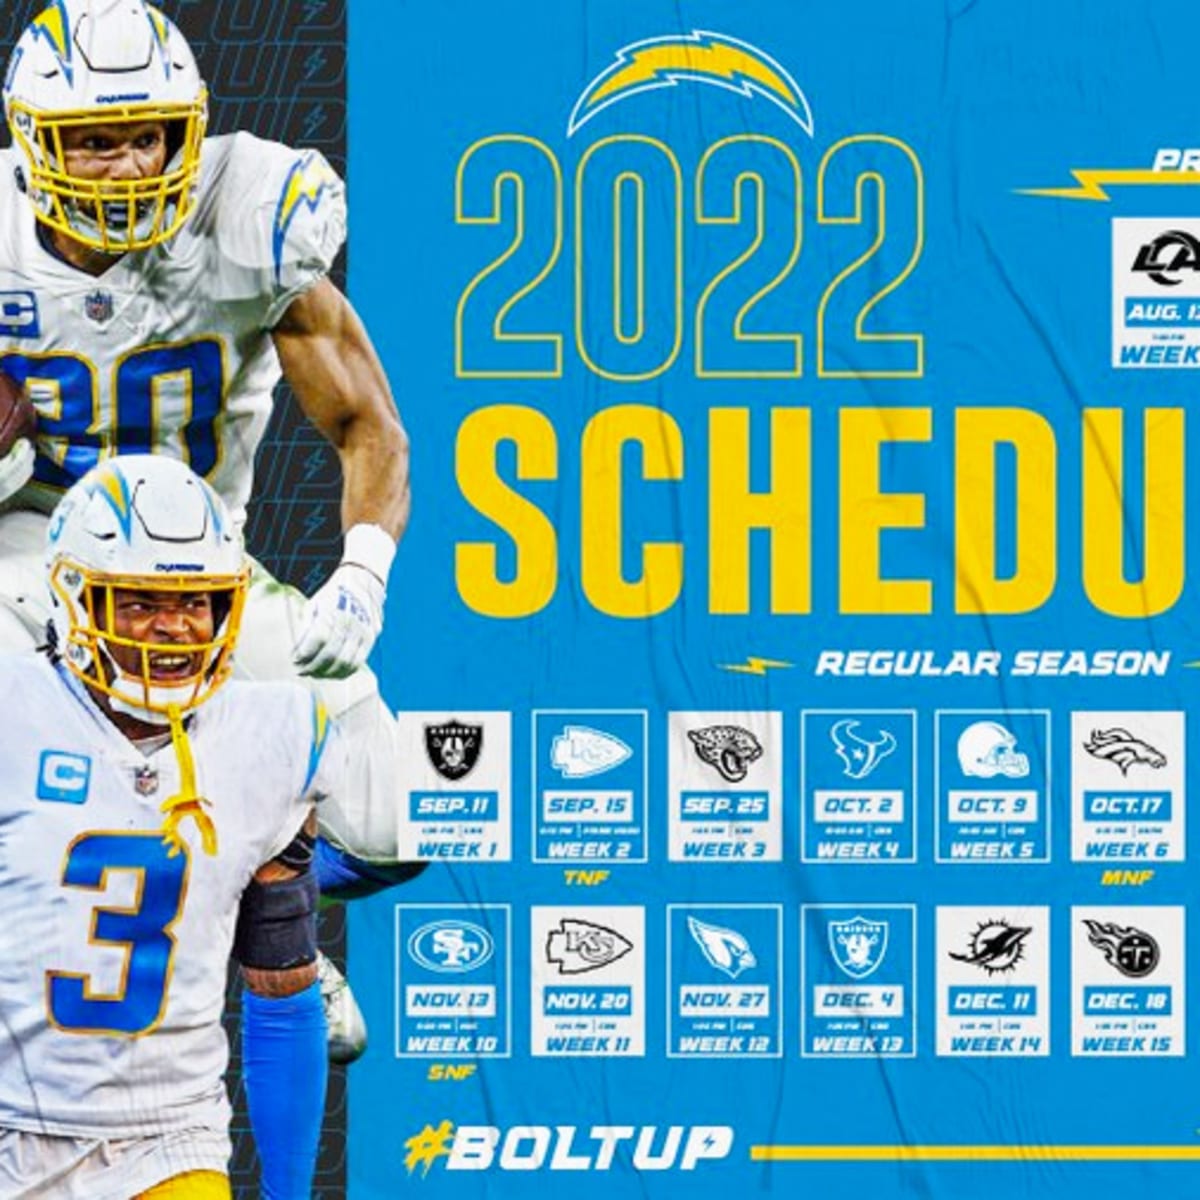 chargers season tickets 2022